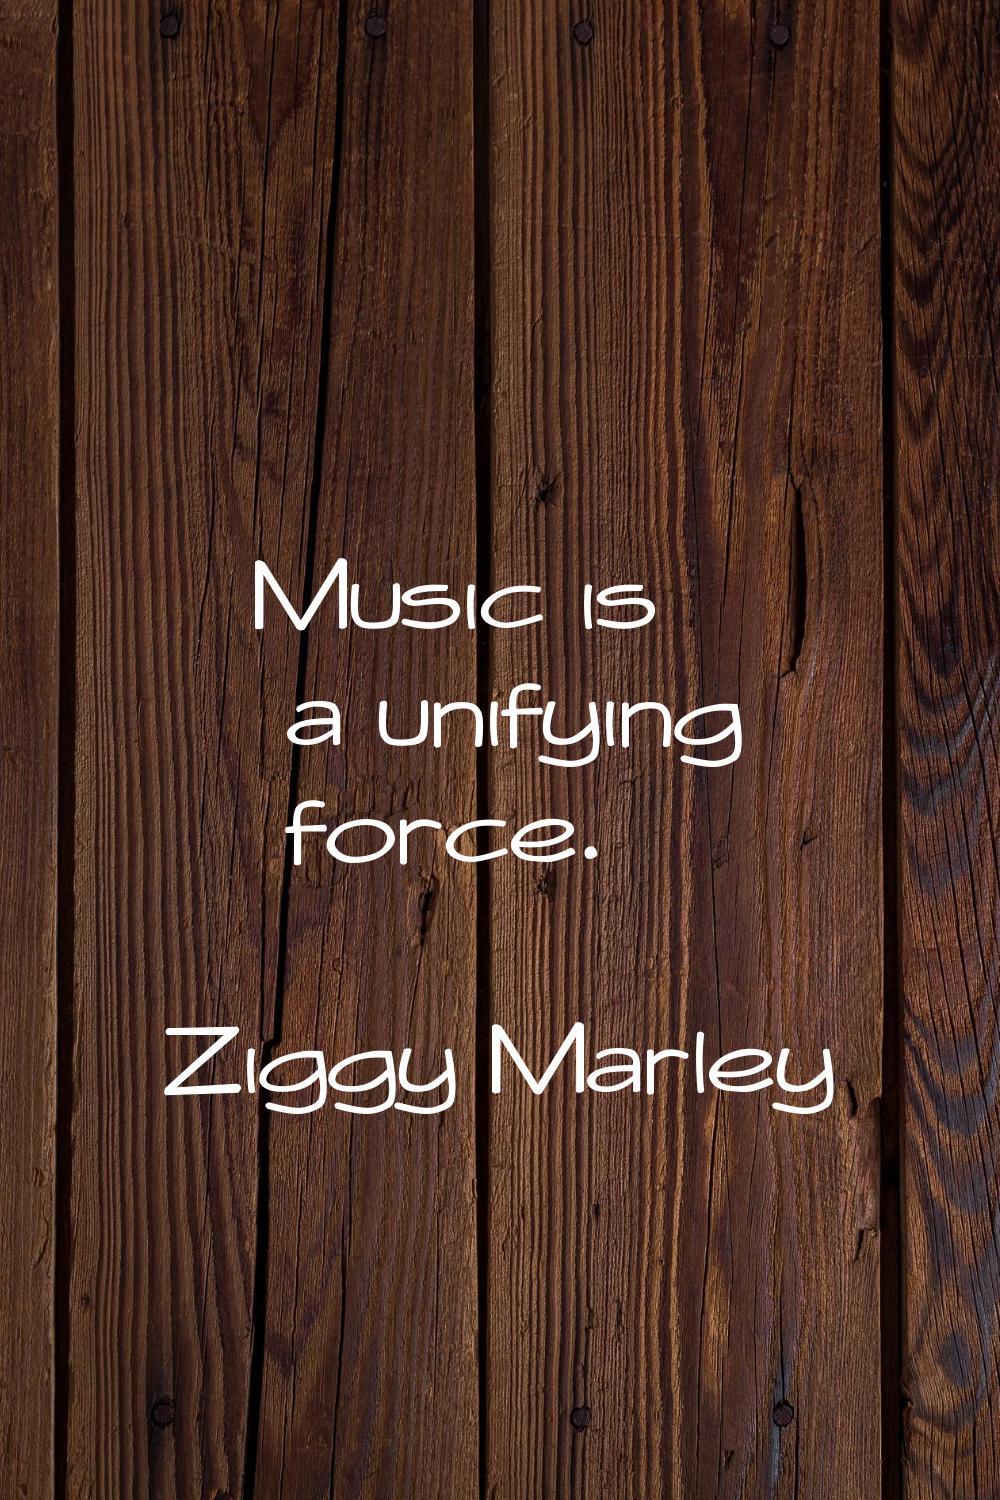 Music is a unifying force.